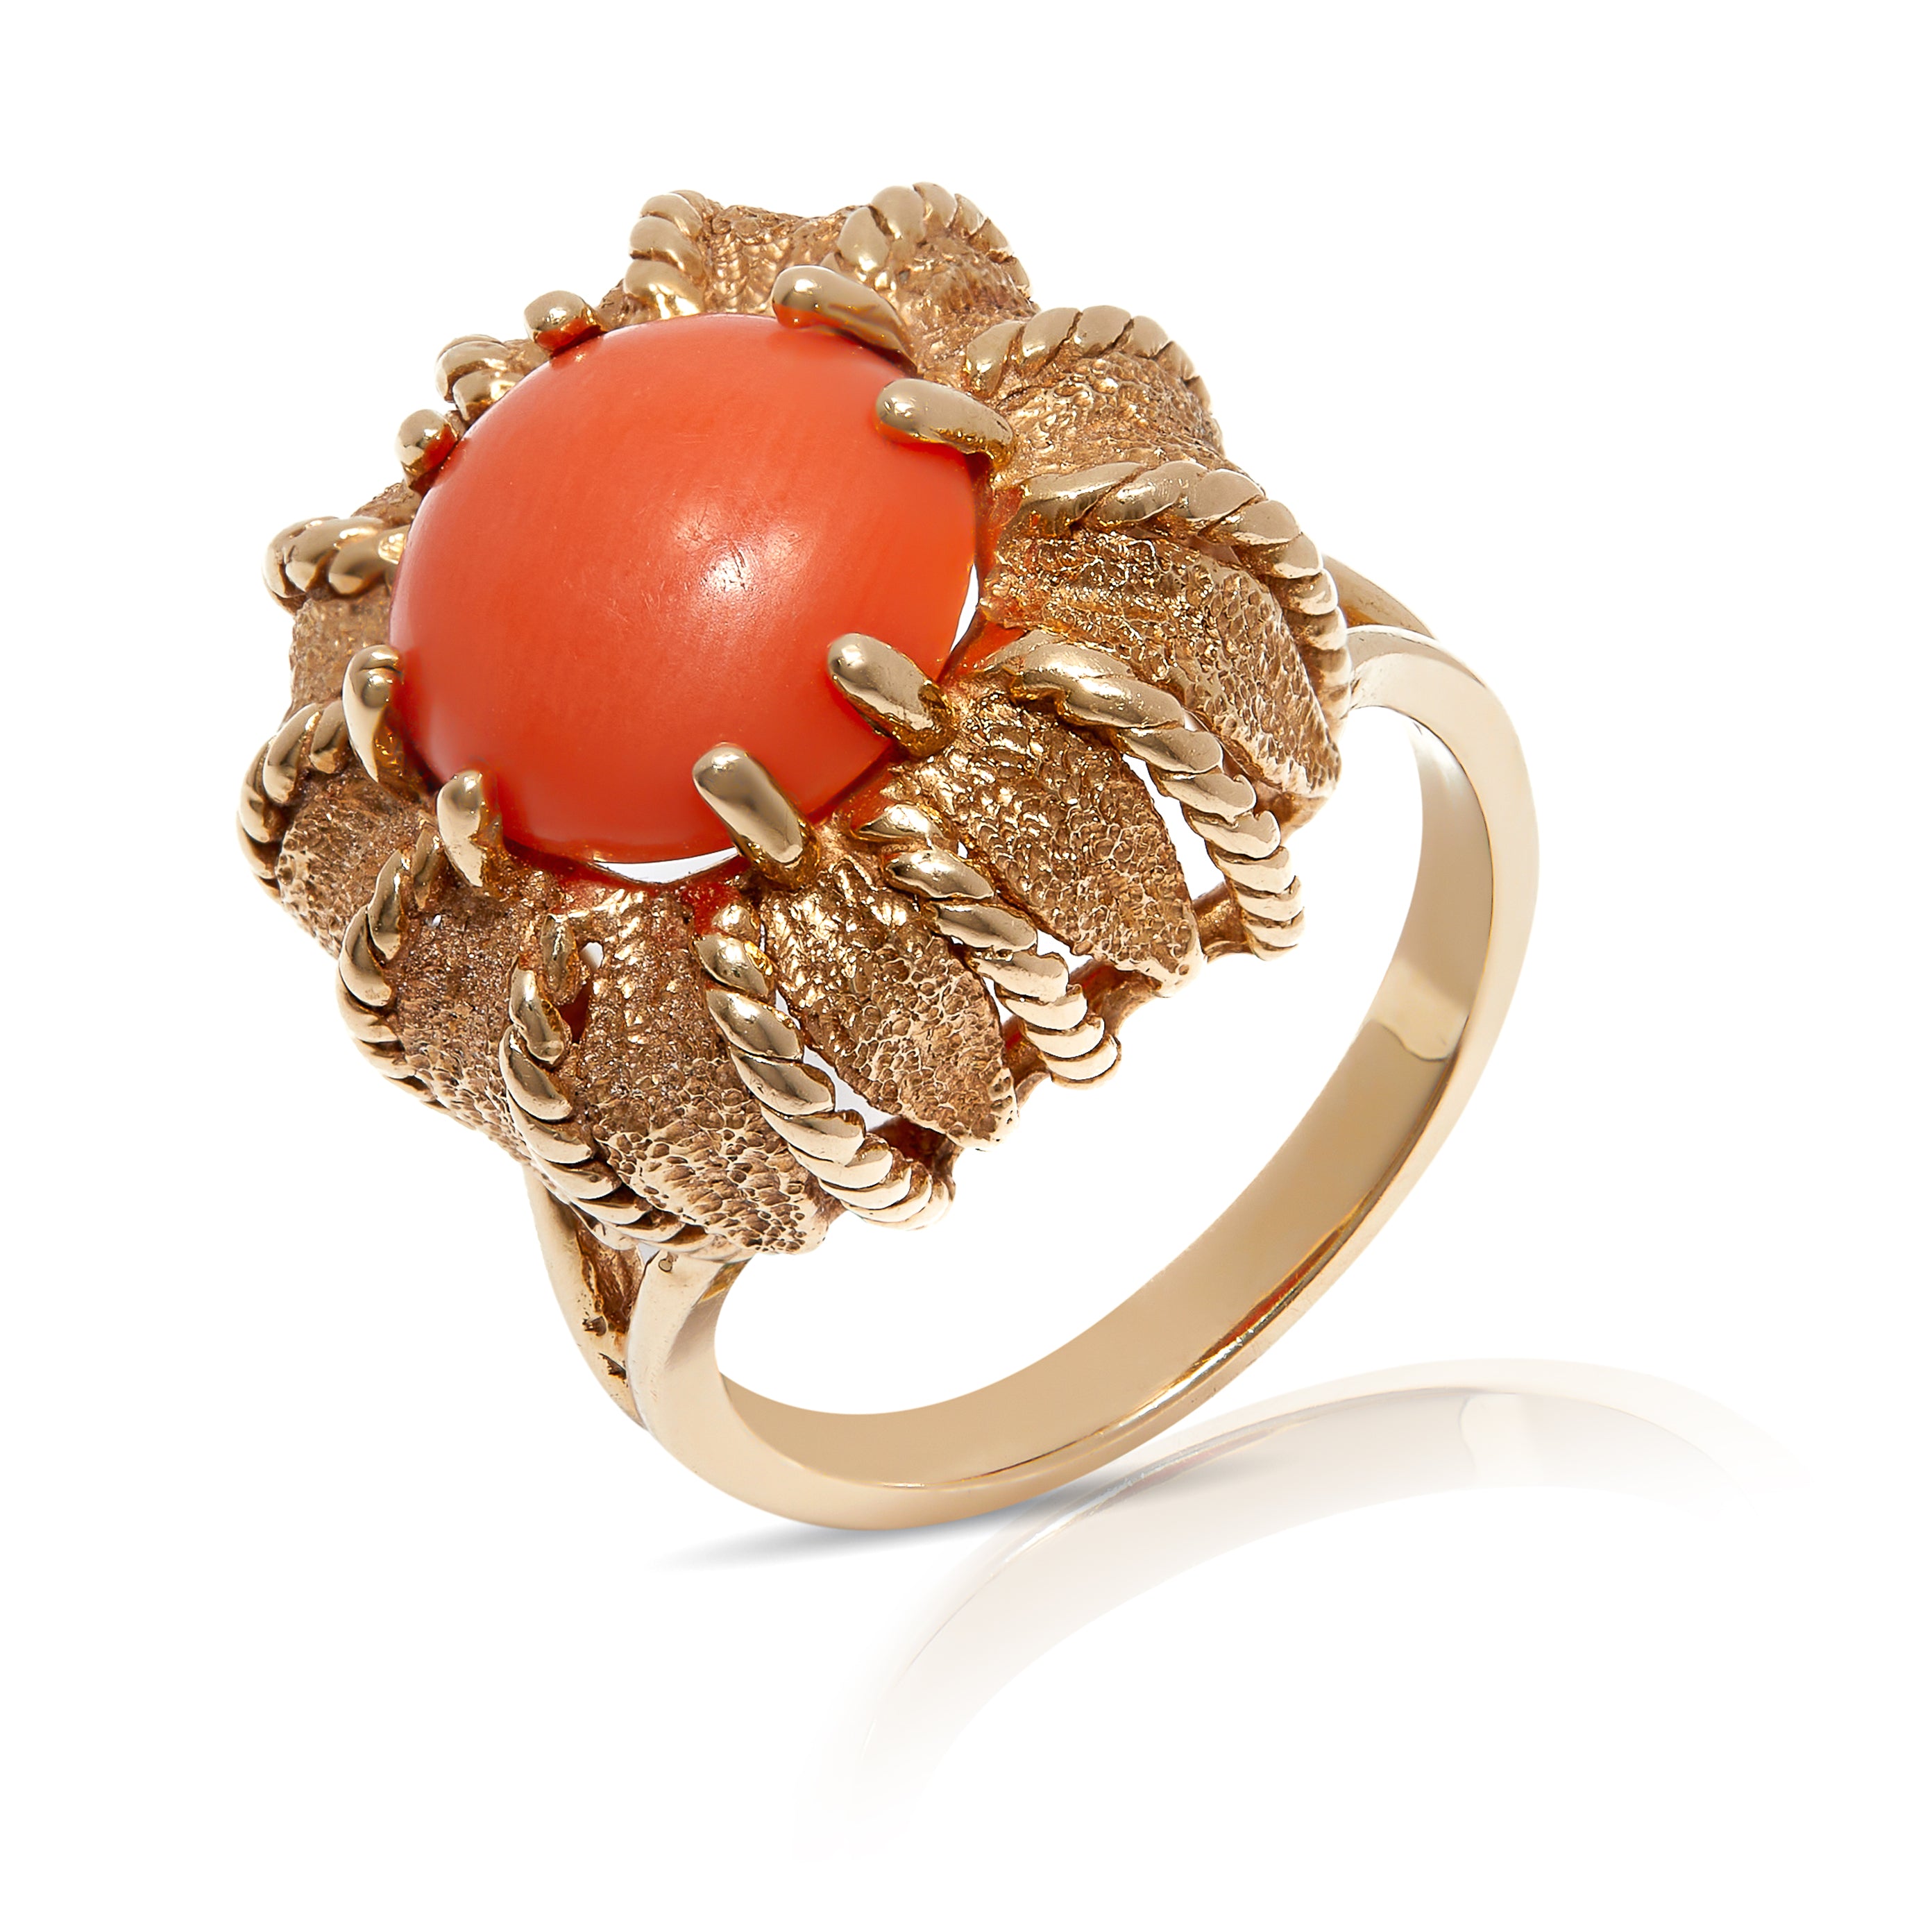 Vintage 14ct gold coral ring in a floral motif.